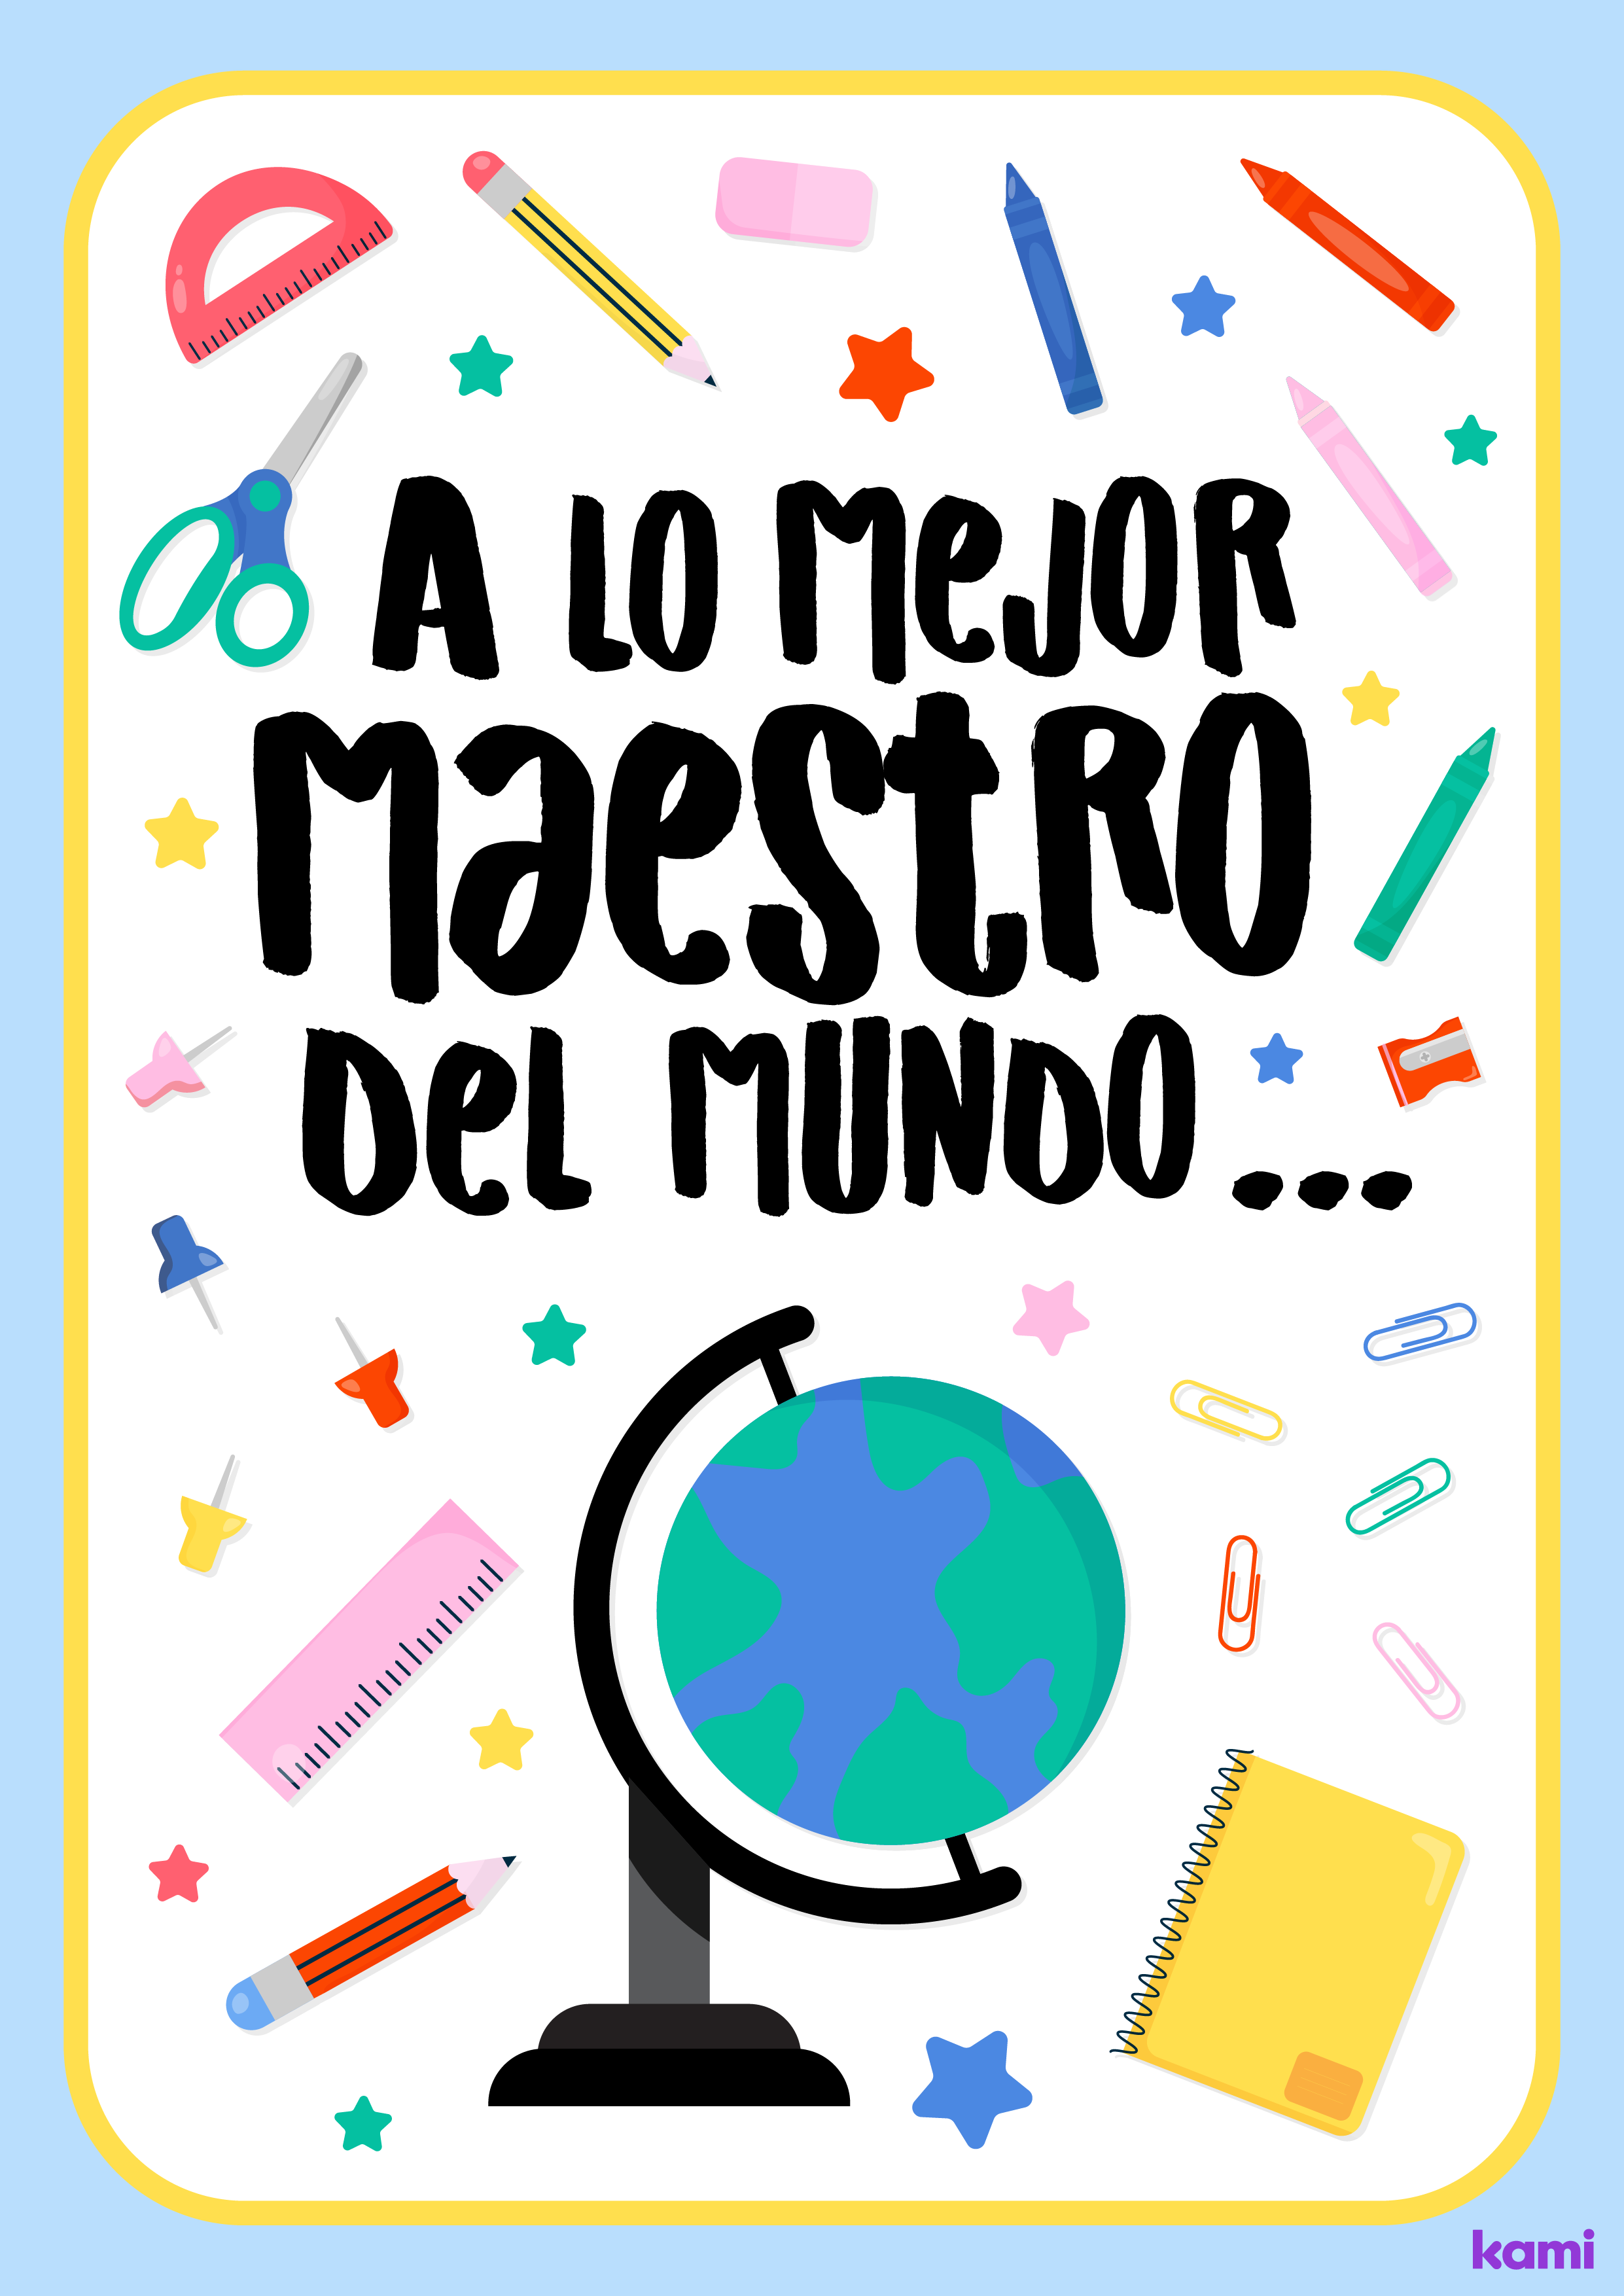 A Greeting Card for Teachers with a Spanish Translation